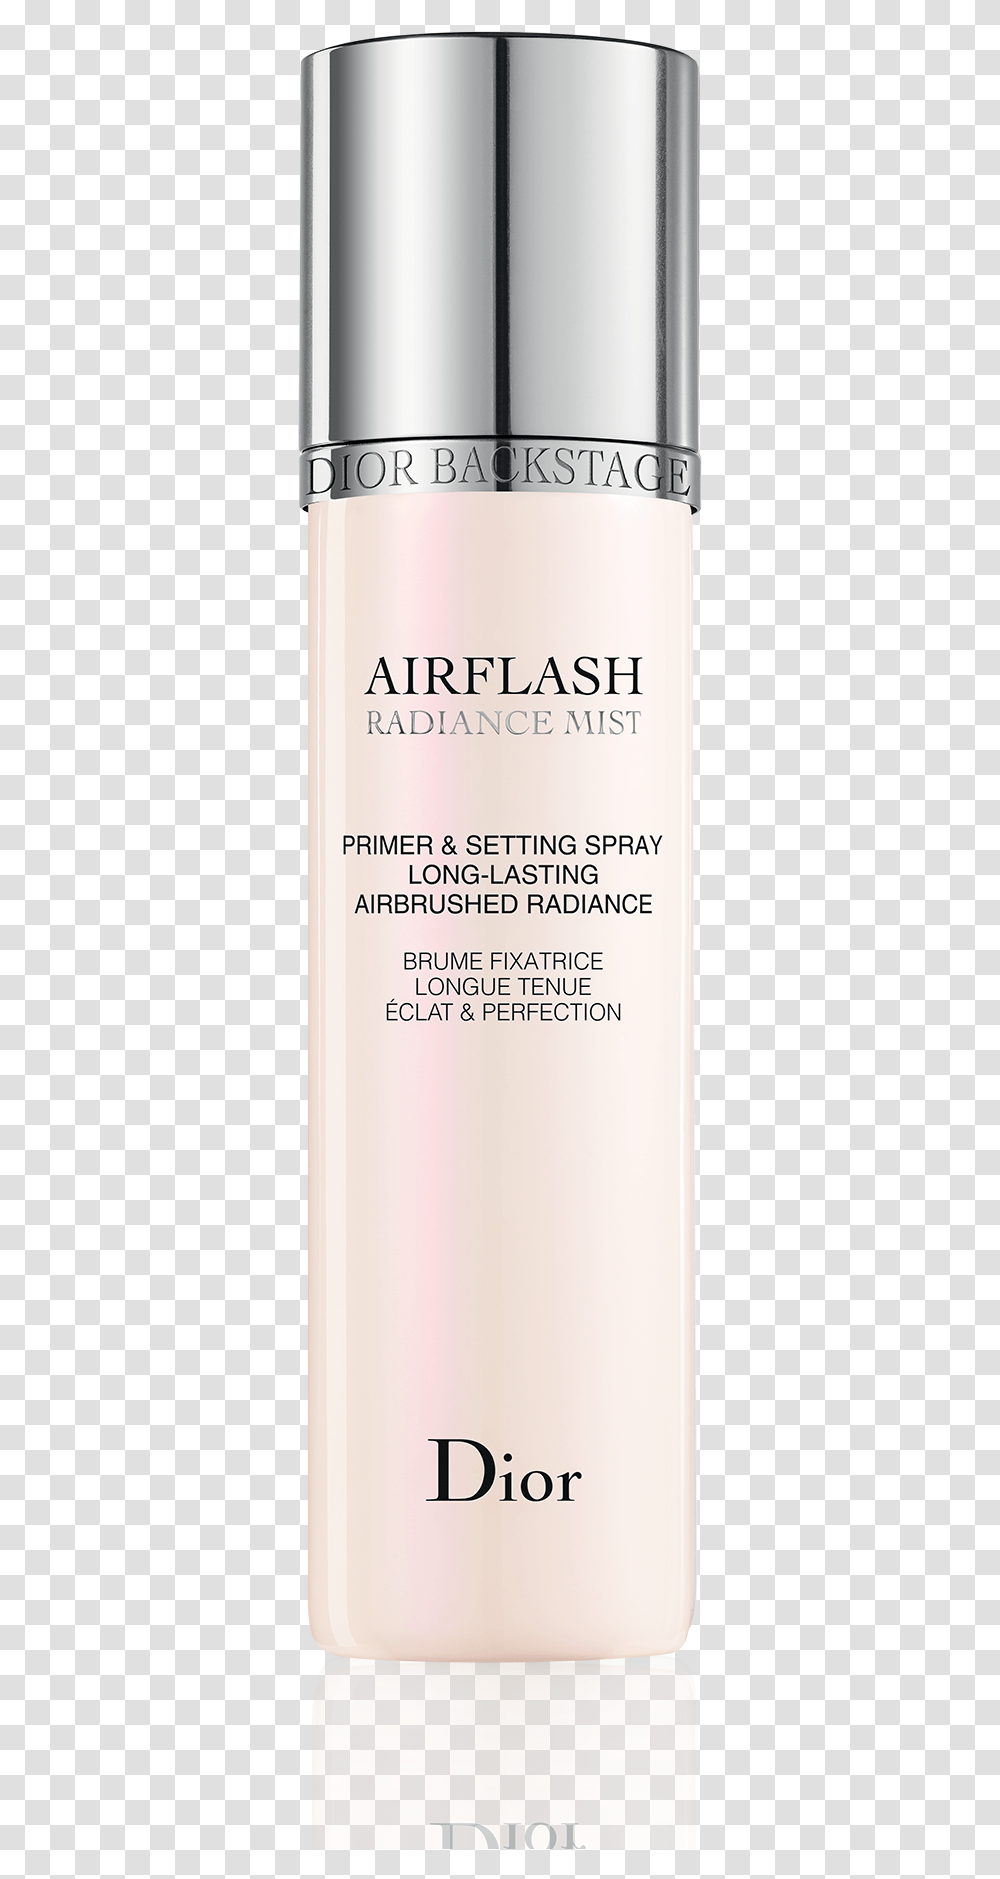 Dior Backstage Airflash Radiance Mist, Aluminium, Tin, Can, Spray Can Transparent Png